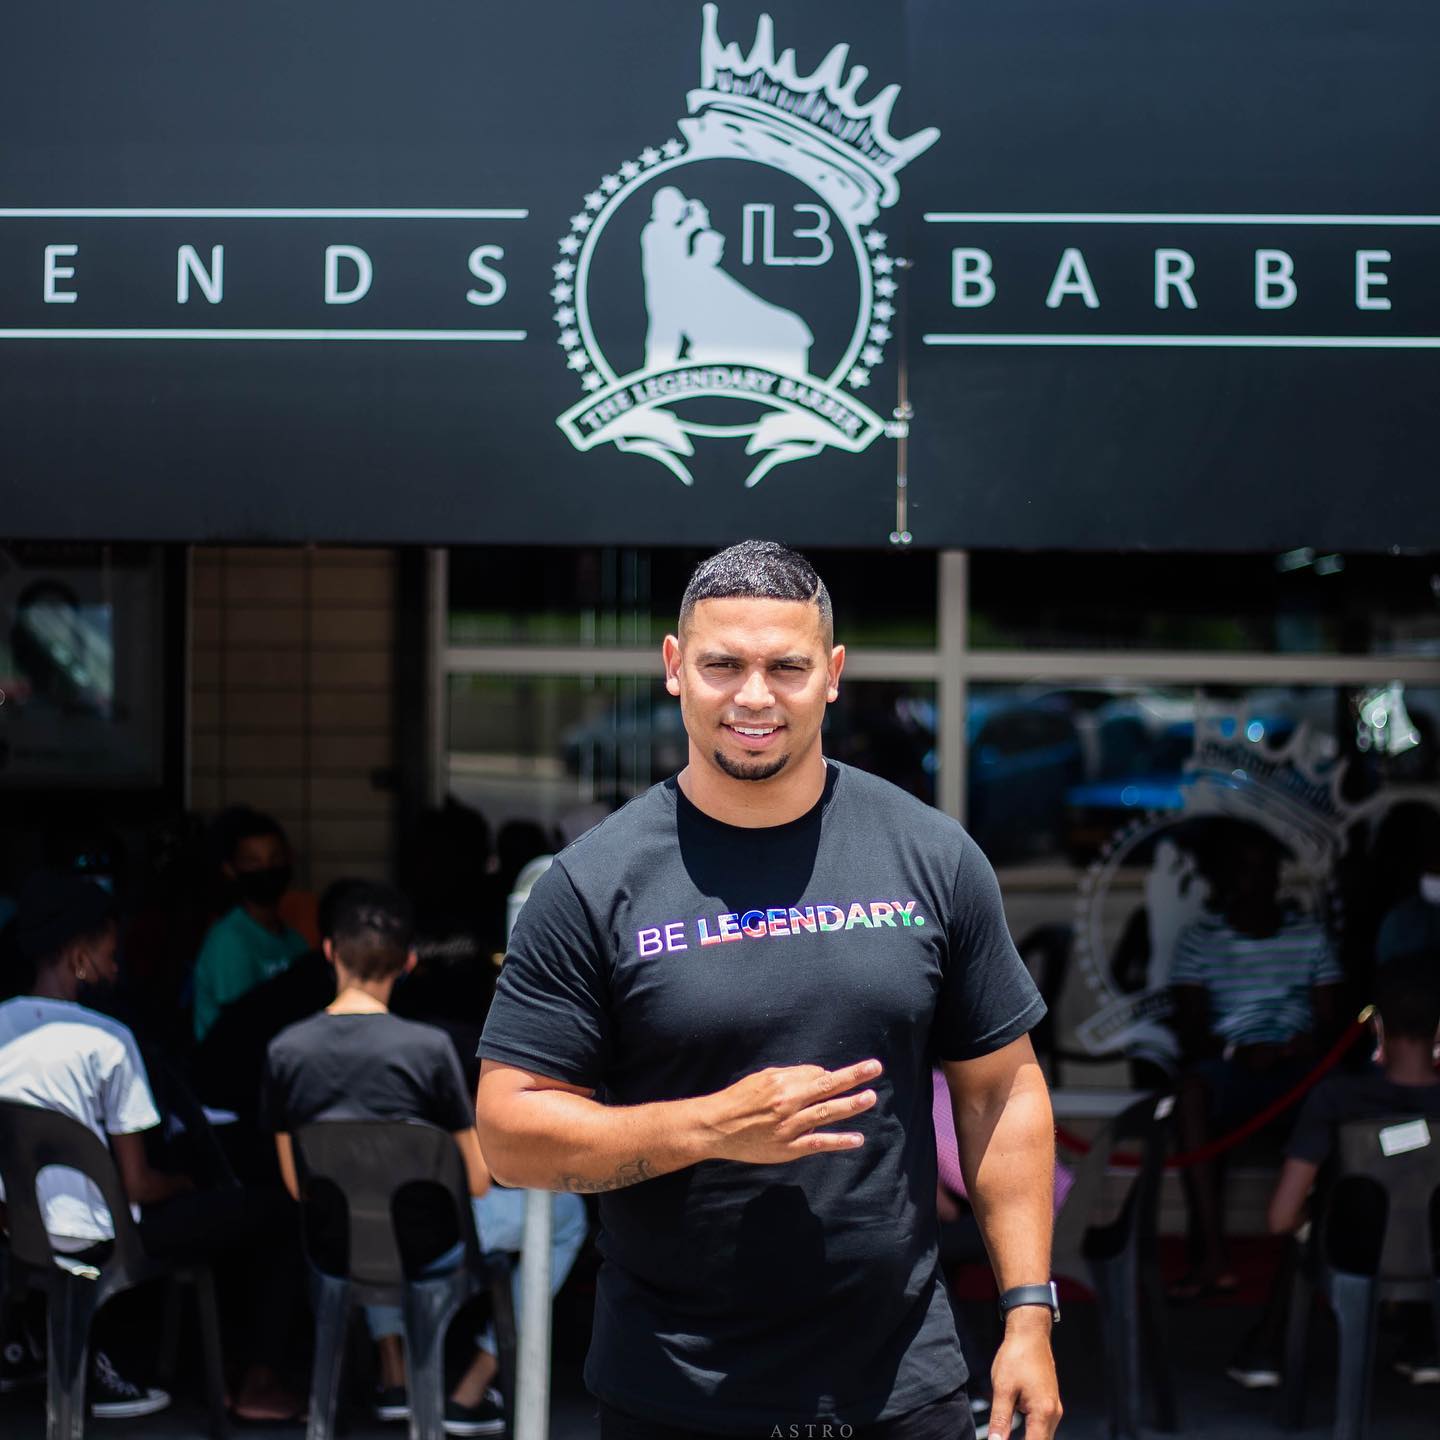 He Gave Riky Rick’s Body The Final Haircut - 7 Things To Know About Sheldon Tatchell From Legends Barbershop